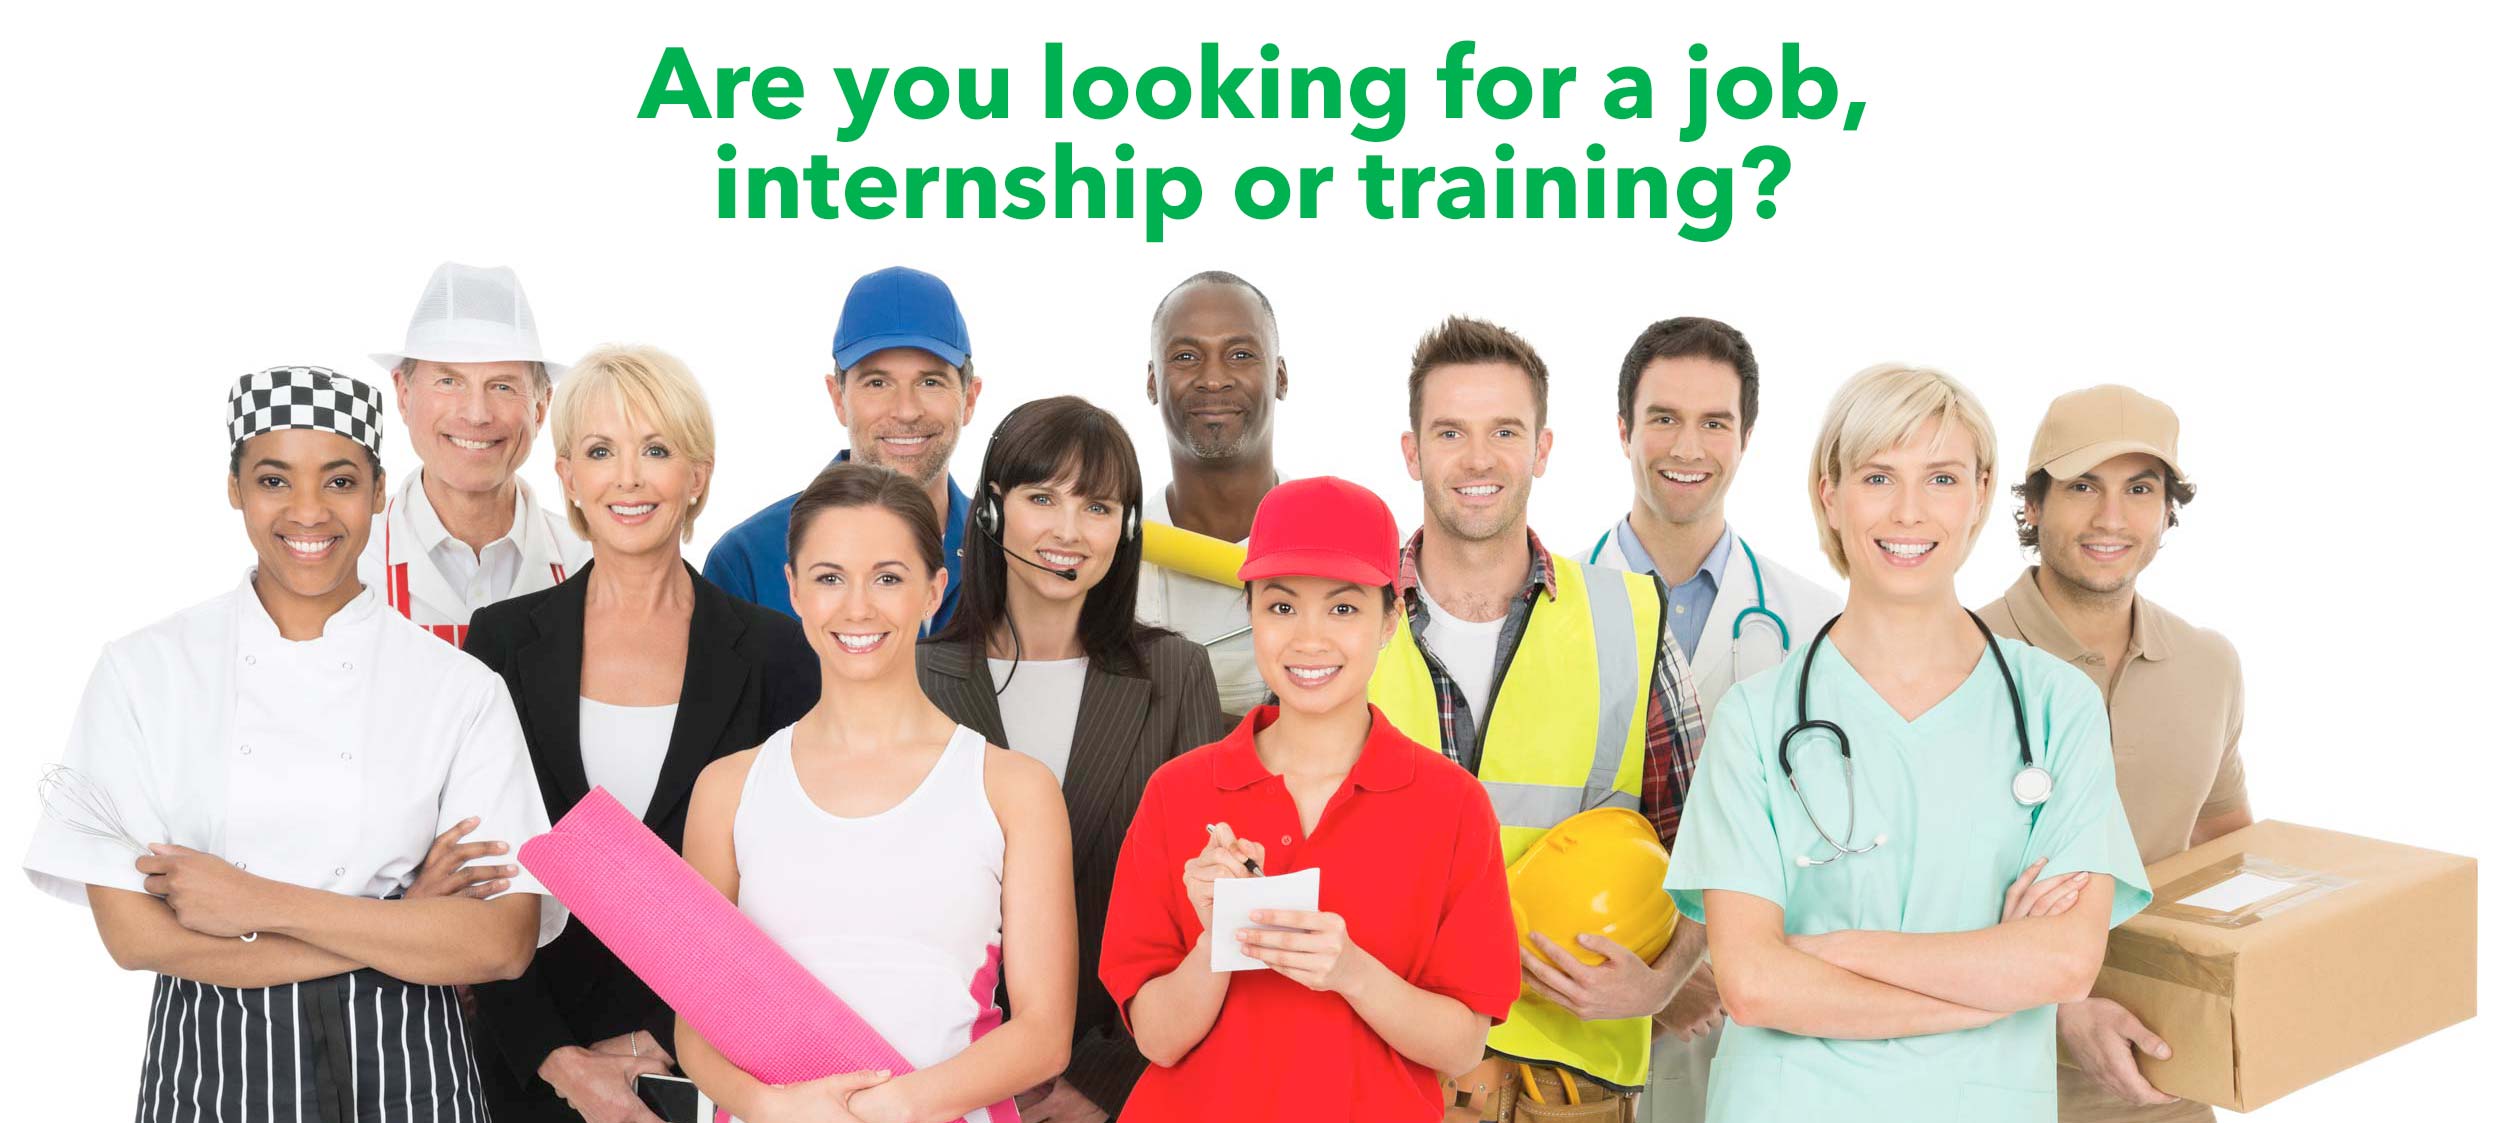 Are looking for a job, internship or training? CREMCN